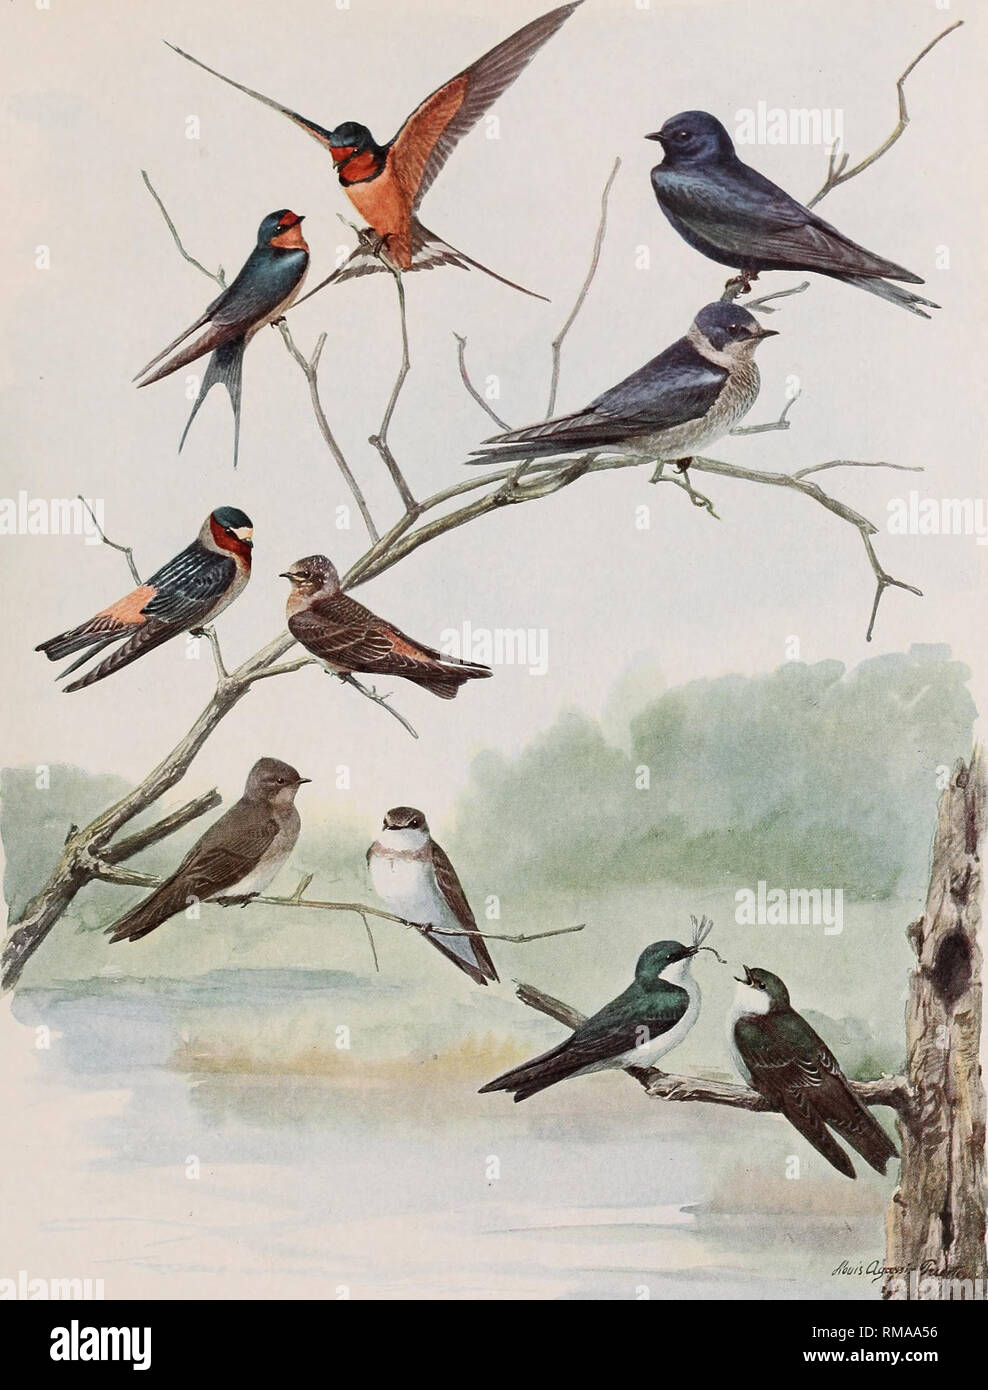 . Annual report. New York State Museum; Science; Science. BIRDS OF NEW YORK Memoir 12. N. Y. State Museum Plate 88. BARN SWALLOW Hirundo erythrogaslra Boddaert FEMALE MALE CLIFF SWALLOW Petrochelidon lunifrons lunifrons (Say) ADULT IMMATURE ROUGH-WINGED SWALLOW Stelgidopteryx serripennis (Audubon) BANK SWALLOW Riparia riparia Linnaeus) PURPLE MARTIN Progne subis sub is (Linnaeus) MALE FEMALE TREE SWALLOW Iridoprocne bicolor (Vieillot) All } nat. size IMMATURE. Please note that these images are extracted from scanned page images that may have been digitally enhanced for readability - coloration Stock Photo